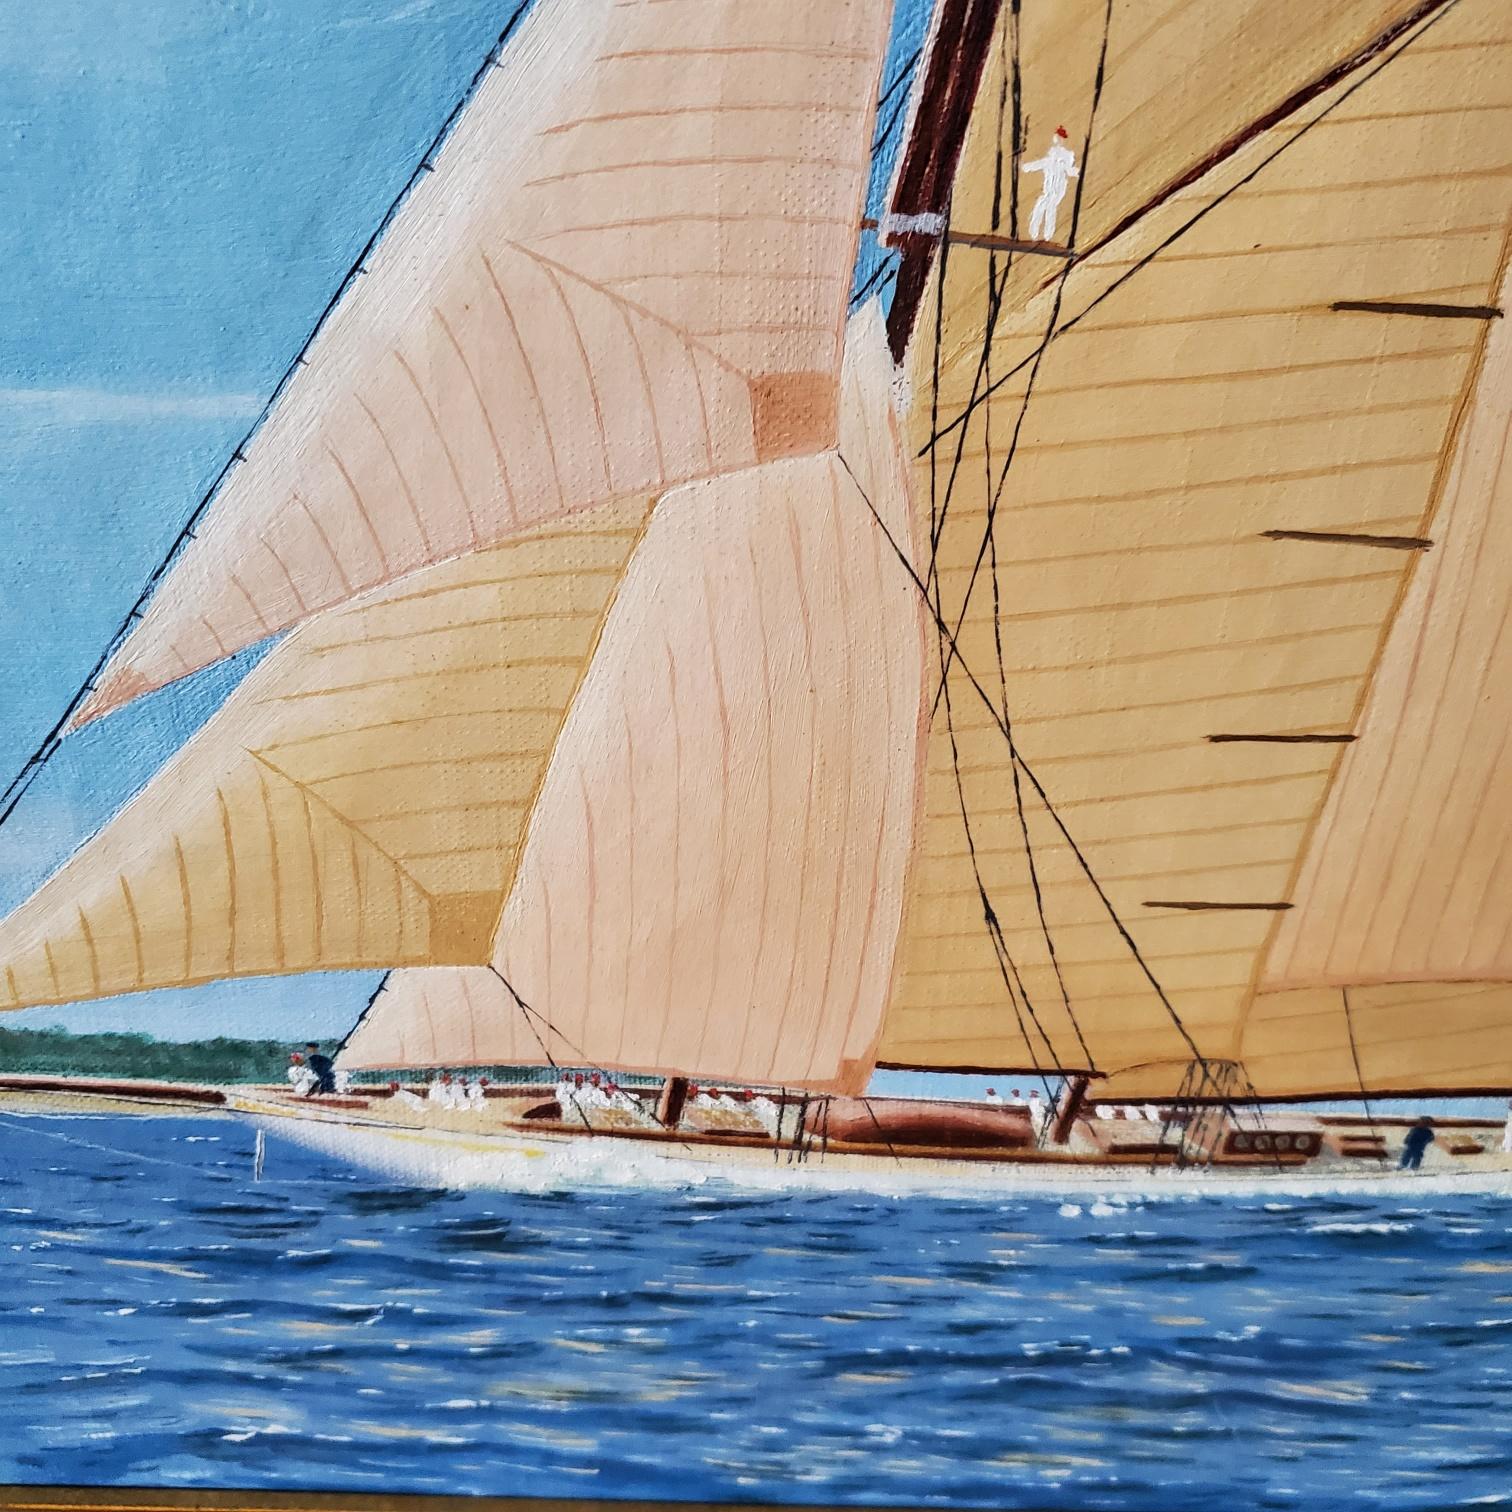 Early Vintage Seascape with Portrait of a Schooner-Rigged Yacht, signed and dated Carl Schroeder, 1937, an un-tutored oil on canvas seascape painting with a port side view of a large schooner rigged racing yacht with all canvas aloft including